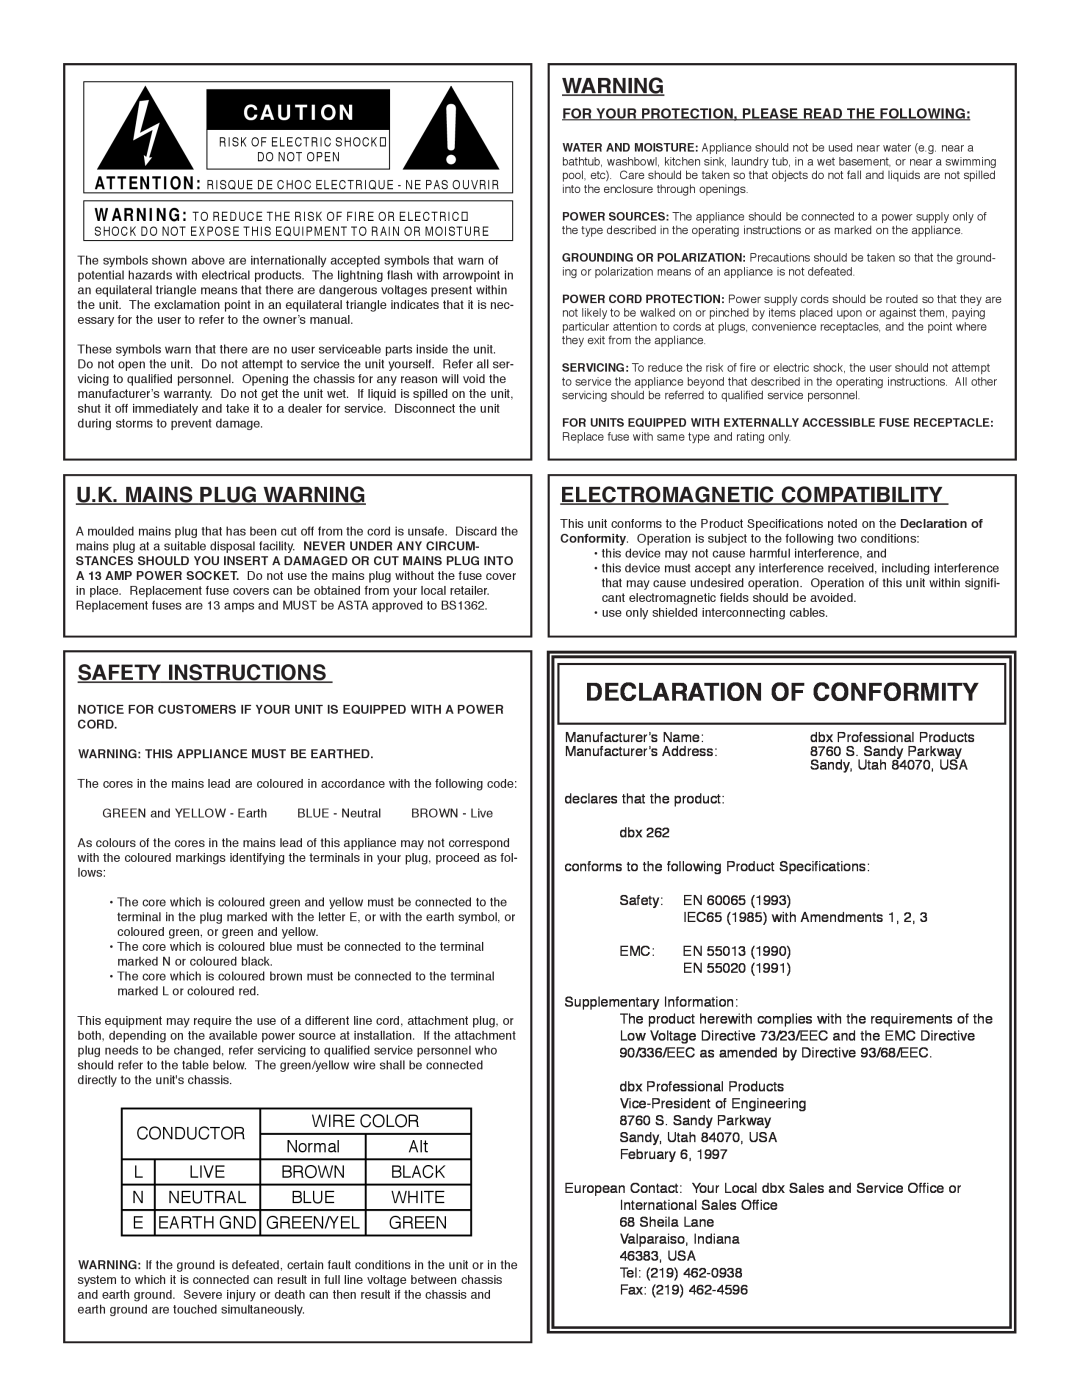 dbx Pro 262 Declaration Of Conformity, U.K. Mains Plug Warning, Electromagnetic Compatibility, Safety Instructions, Normal 